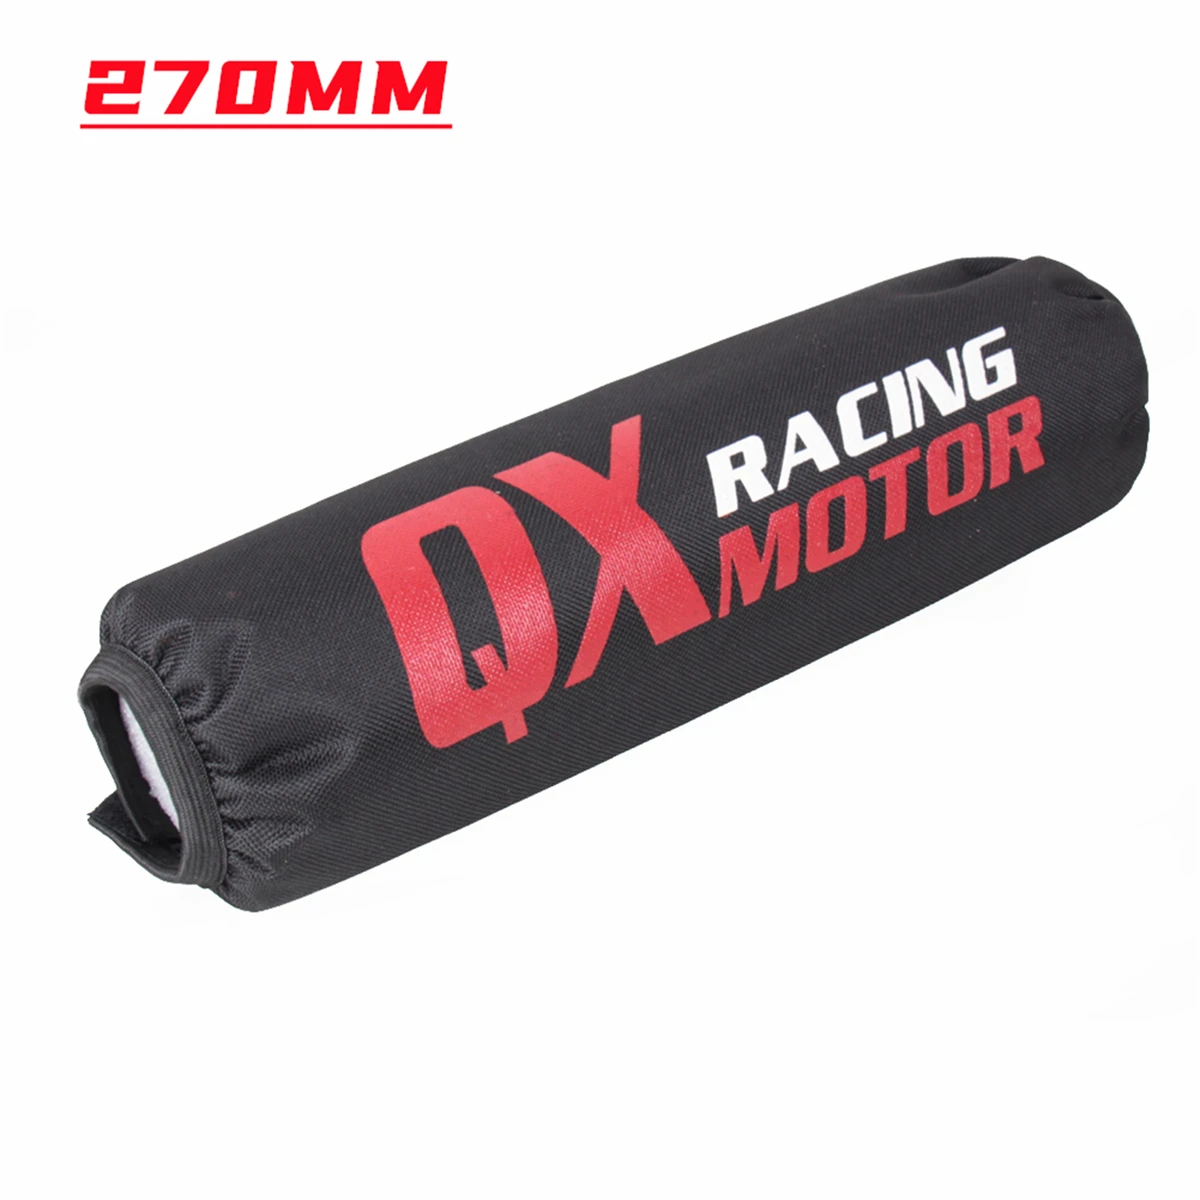 

270mm 350mm Rear Shock Absorber Suspension Protector Protection Cover For CRF YZF KLX Dirt Bike Motorcycle ATV Quad Motocross